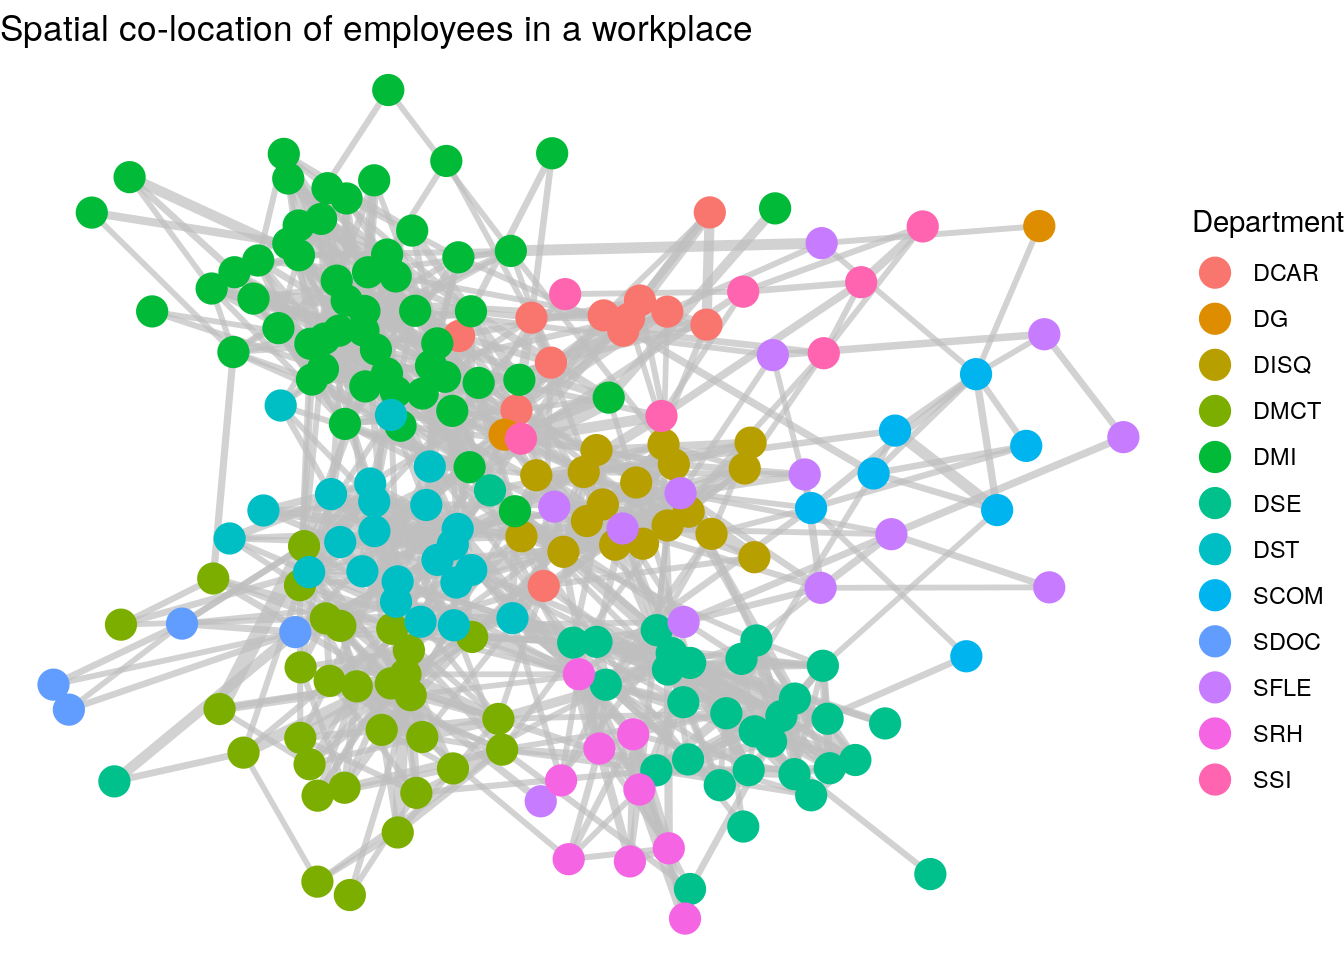 Connection of employees in a workplace with edge thickness weighted by minutes spent spatially co-located and vertices colored by department